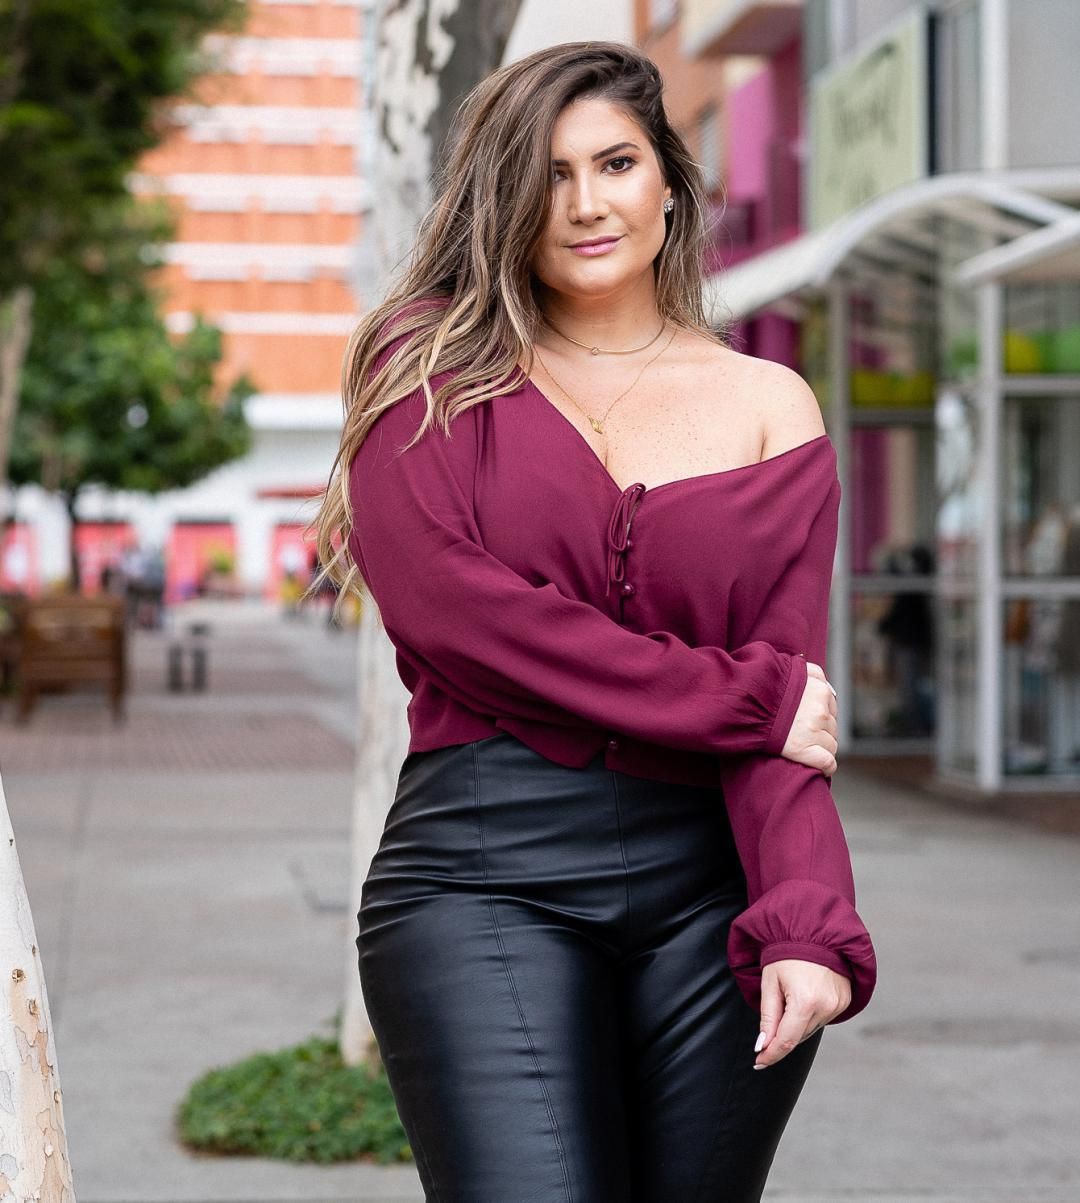 Top 92+ Pictures Pictures Of Plus Size Models Completed